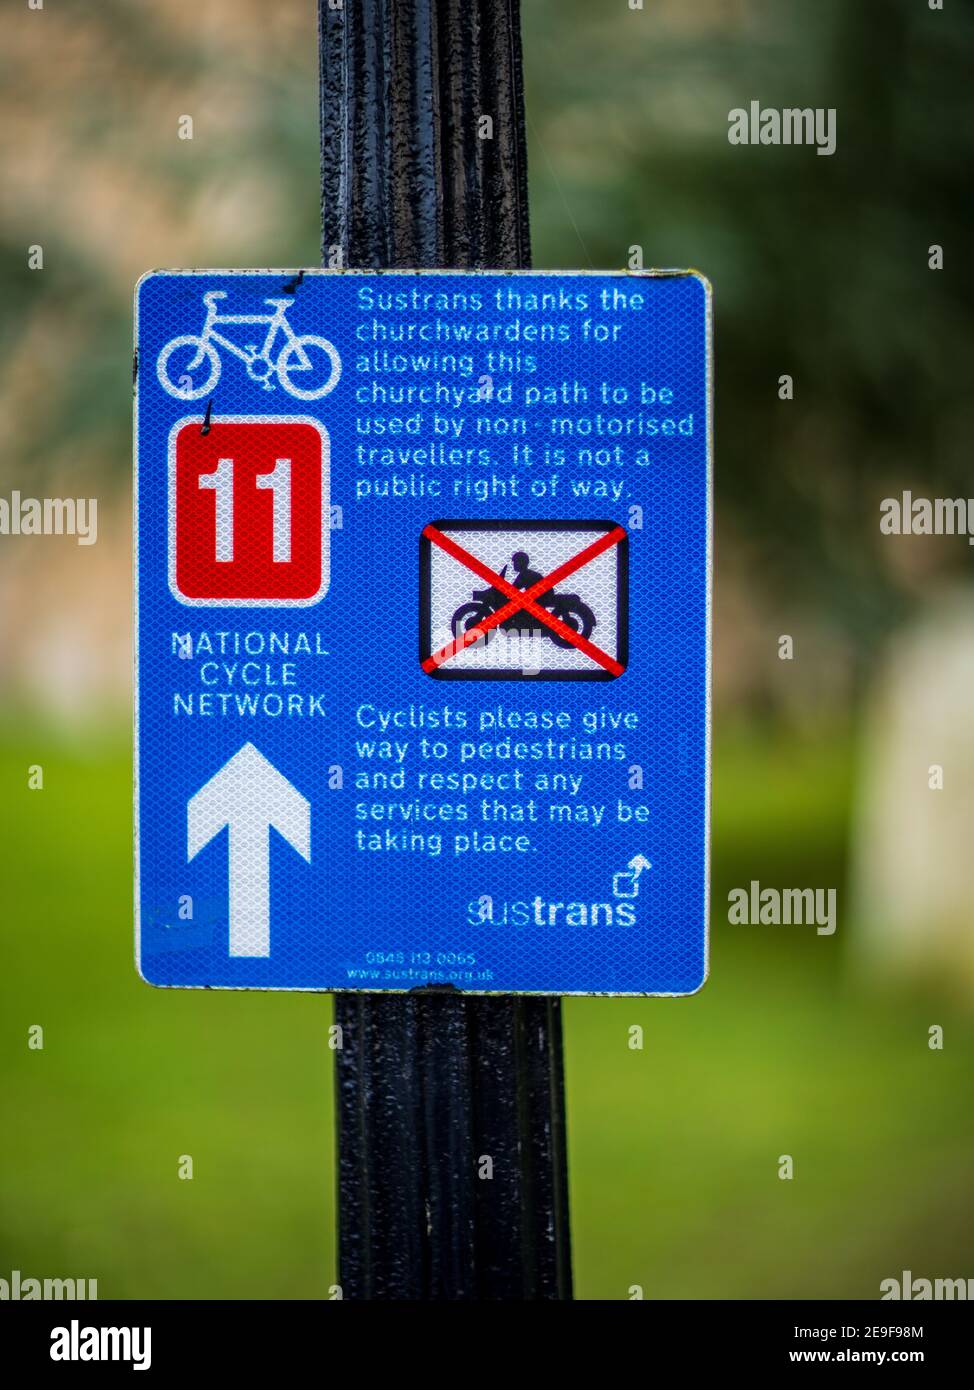 National Cycle Network Route 11 segno in un cantiere a Cambridgeshire. Foto Stock